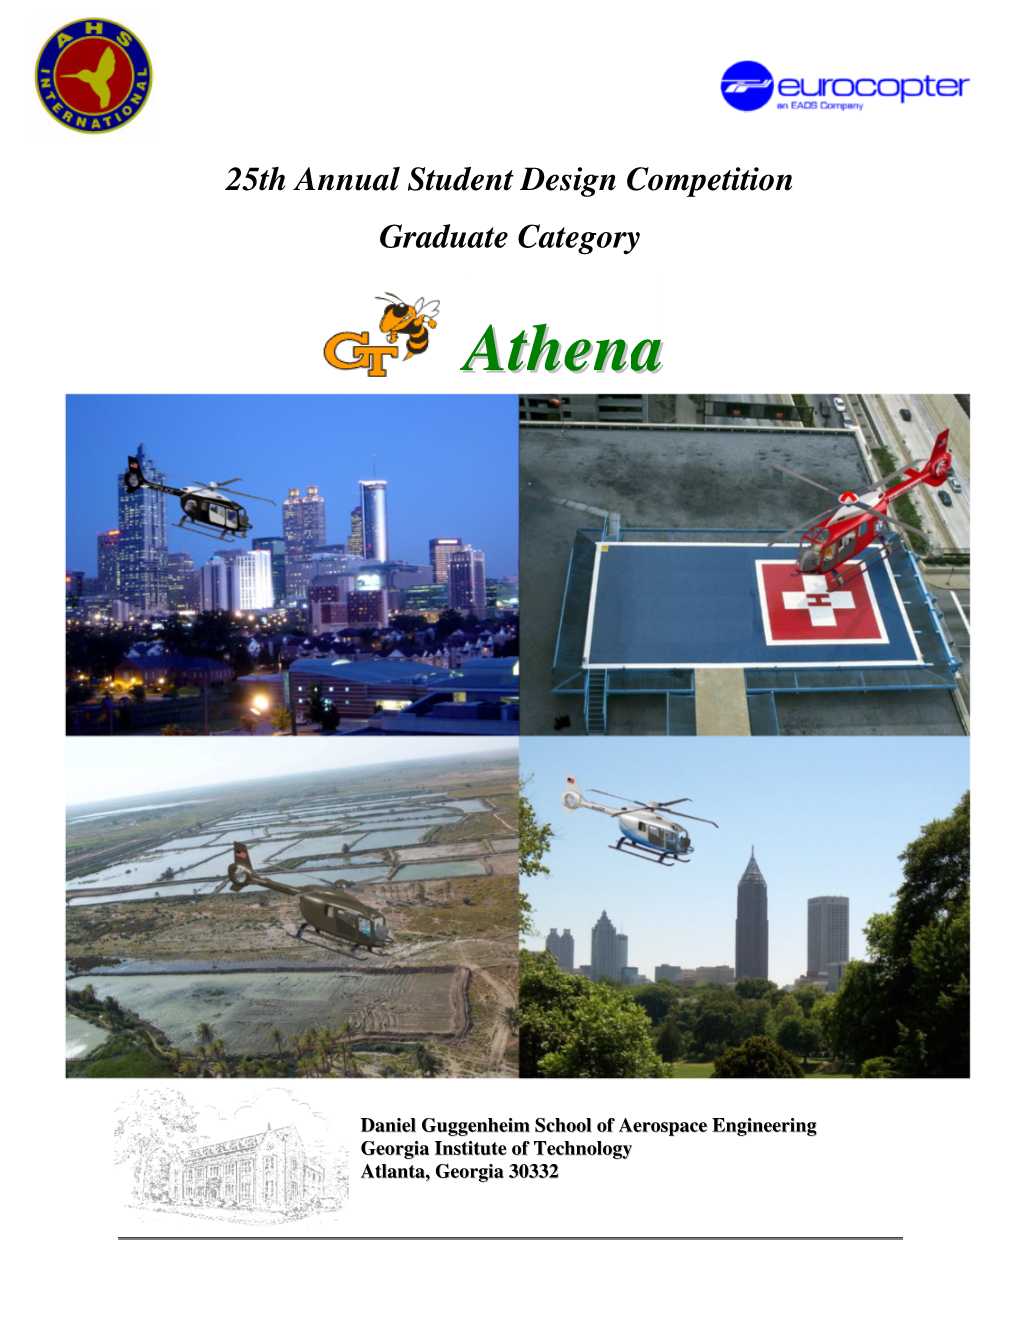 Athena Helicopter Detailed in This Report Is an Example of Such a Helicopter